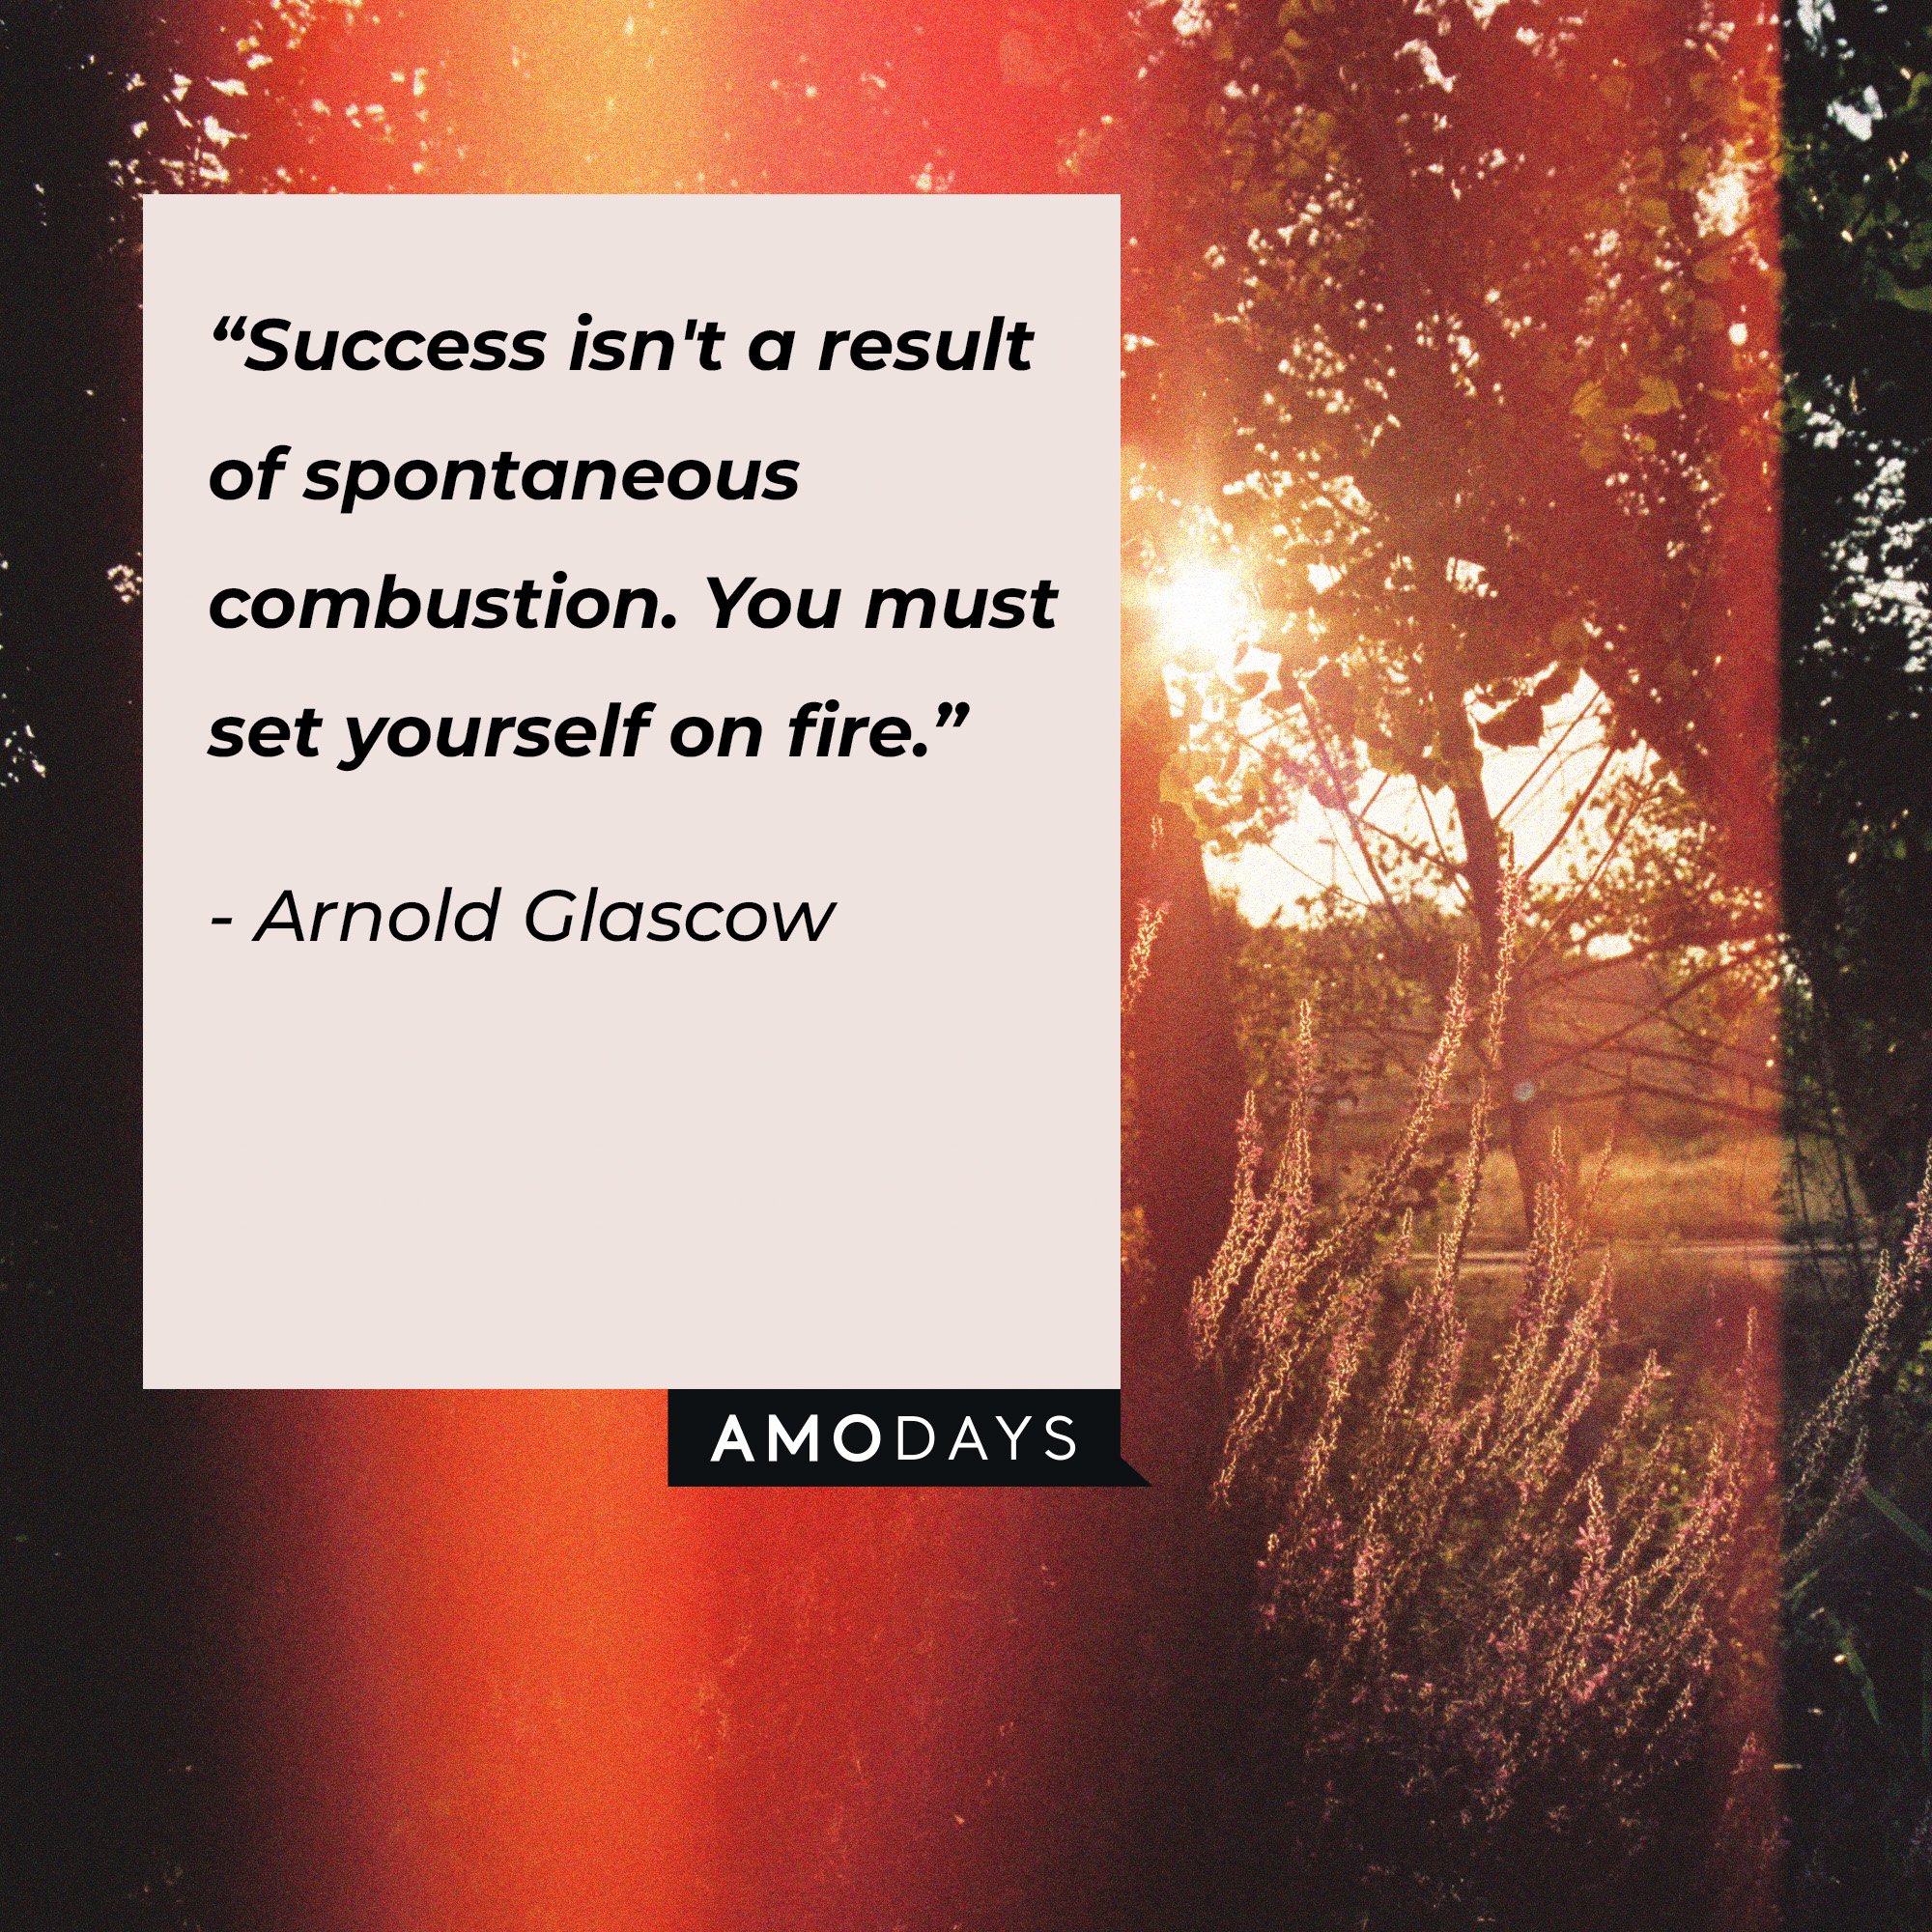  Arnold Glascow's quote: “Success isn't a result of spontaneous combustion. You must set yourself on fire.” | Image: AmoDays